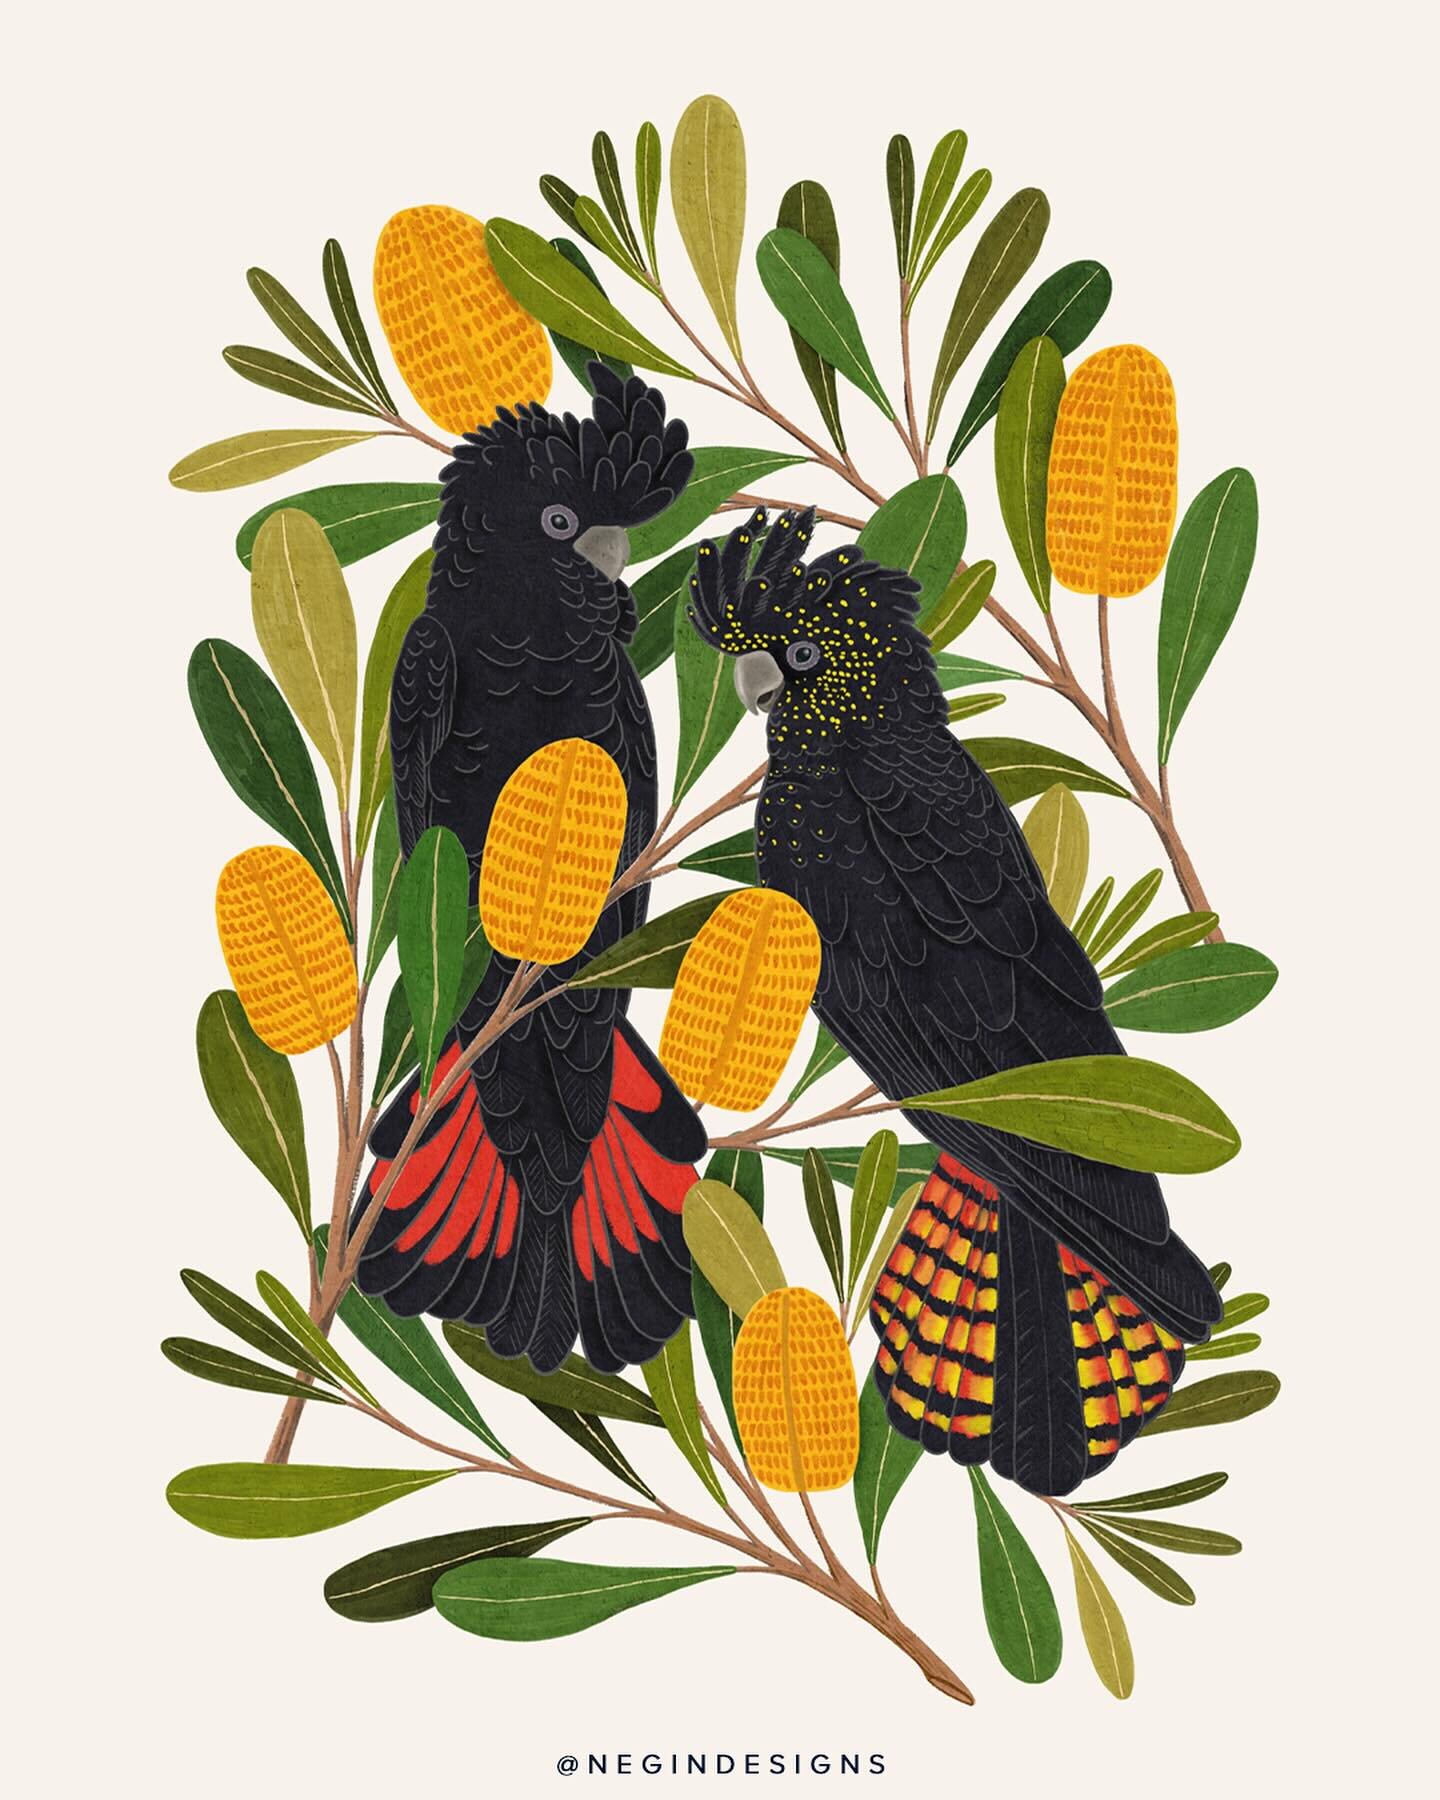 These two may be cheeky, but they certainly do make a handsome pair! 🥰This print is now available in my shop, link in bio 👆
.
#digitalart #procreate #australianwildlife #australianbirds #sketchbook #sketchdaily #botanicalpickmeup #calledtobecreativ